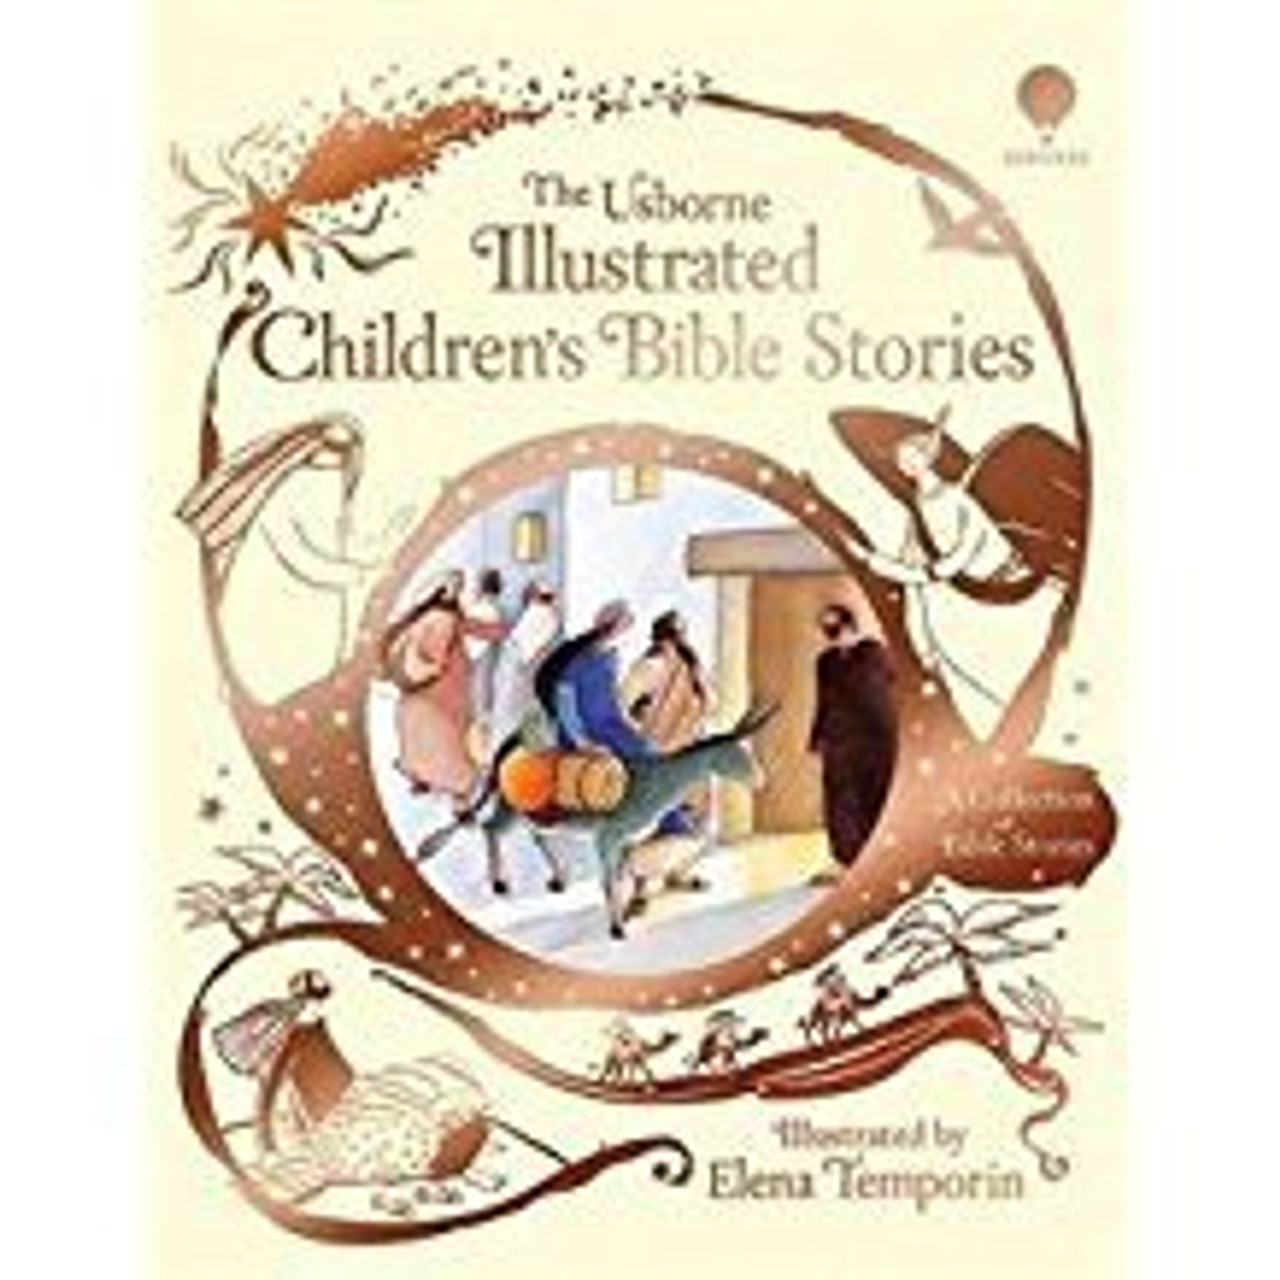 ILLUSTRATED CHILDREN'S BIBLE STORIES (HB)